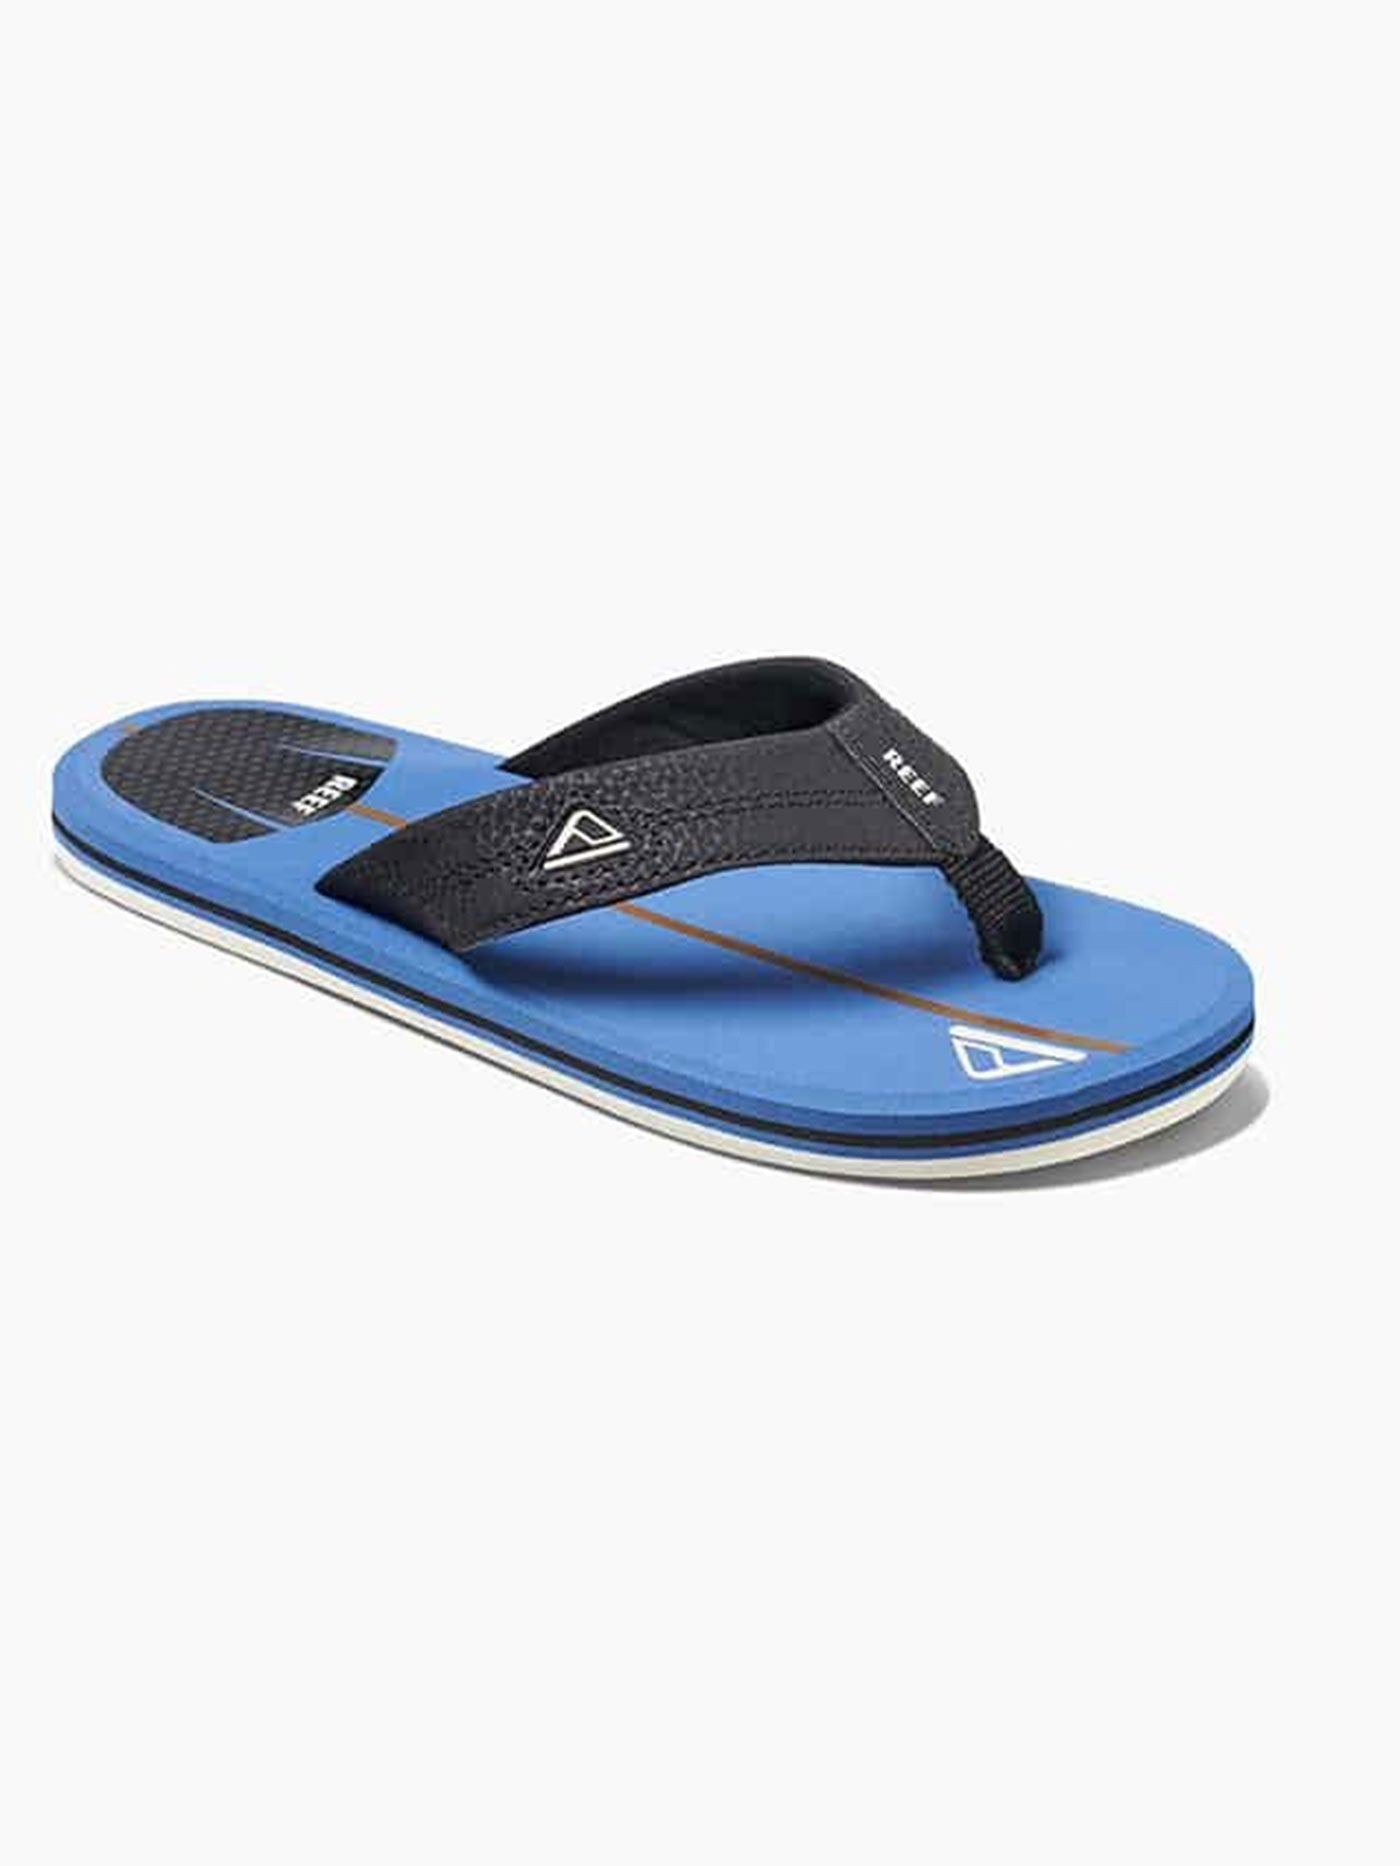 REEF Boy's Shaper Sandals Blue Youth Sandals Reef 